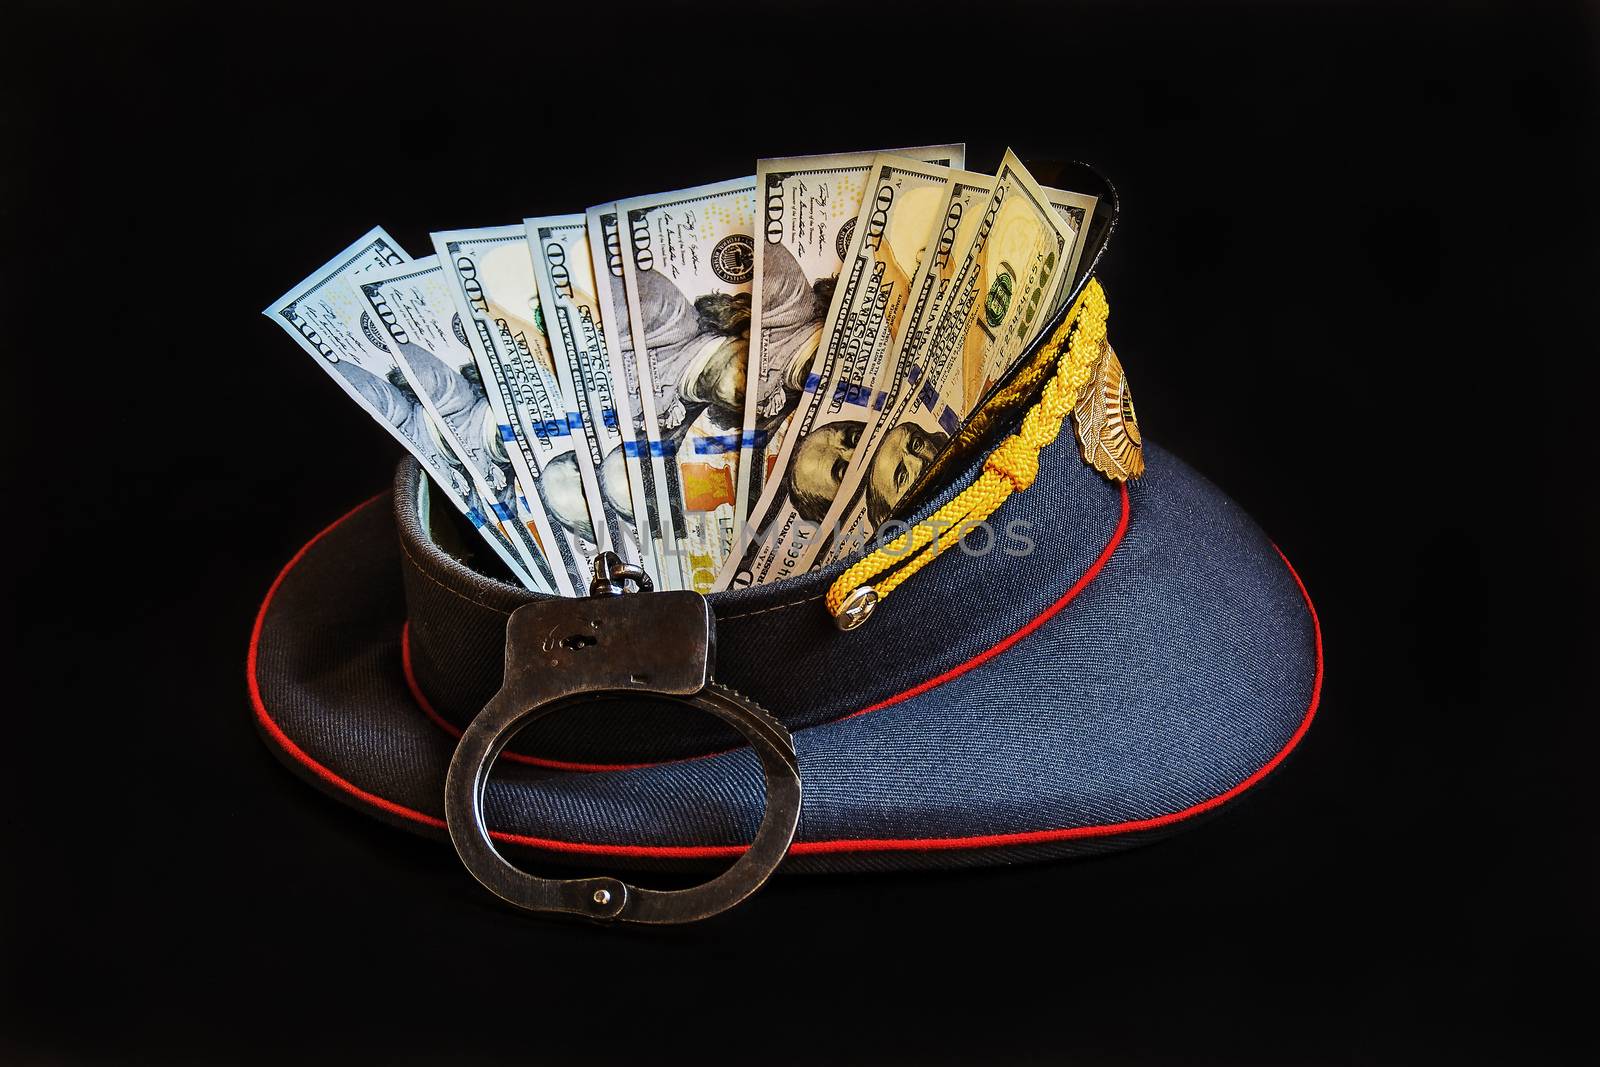 Abstract picture with the image of a police cap, handcuffs and US currency

